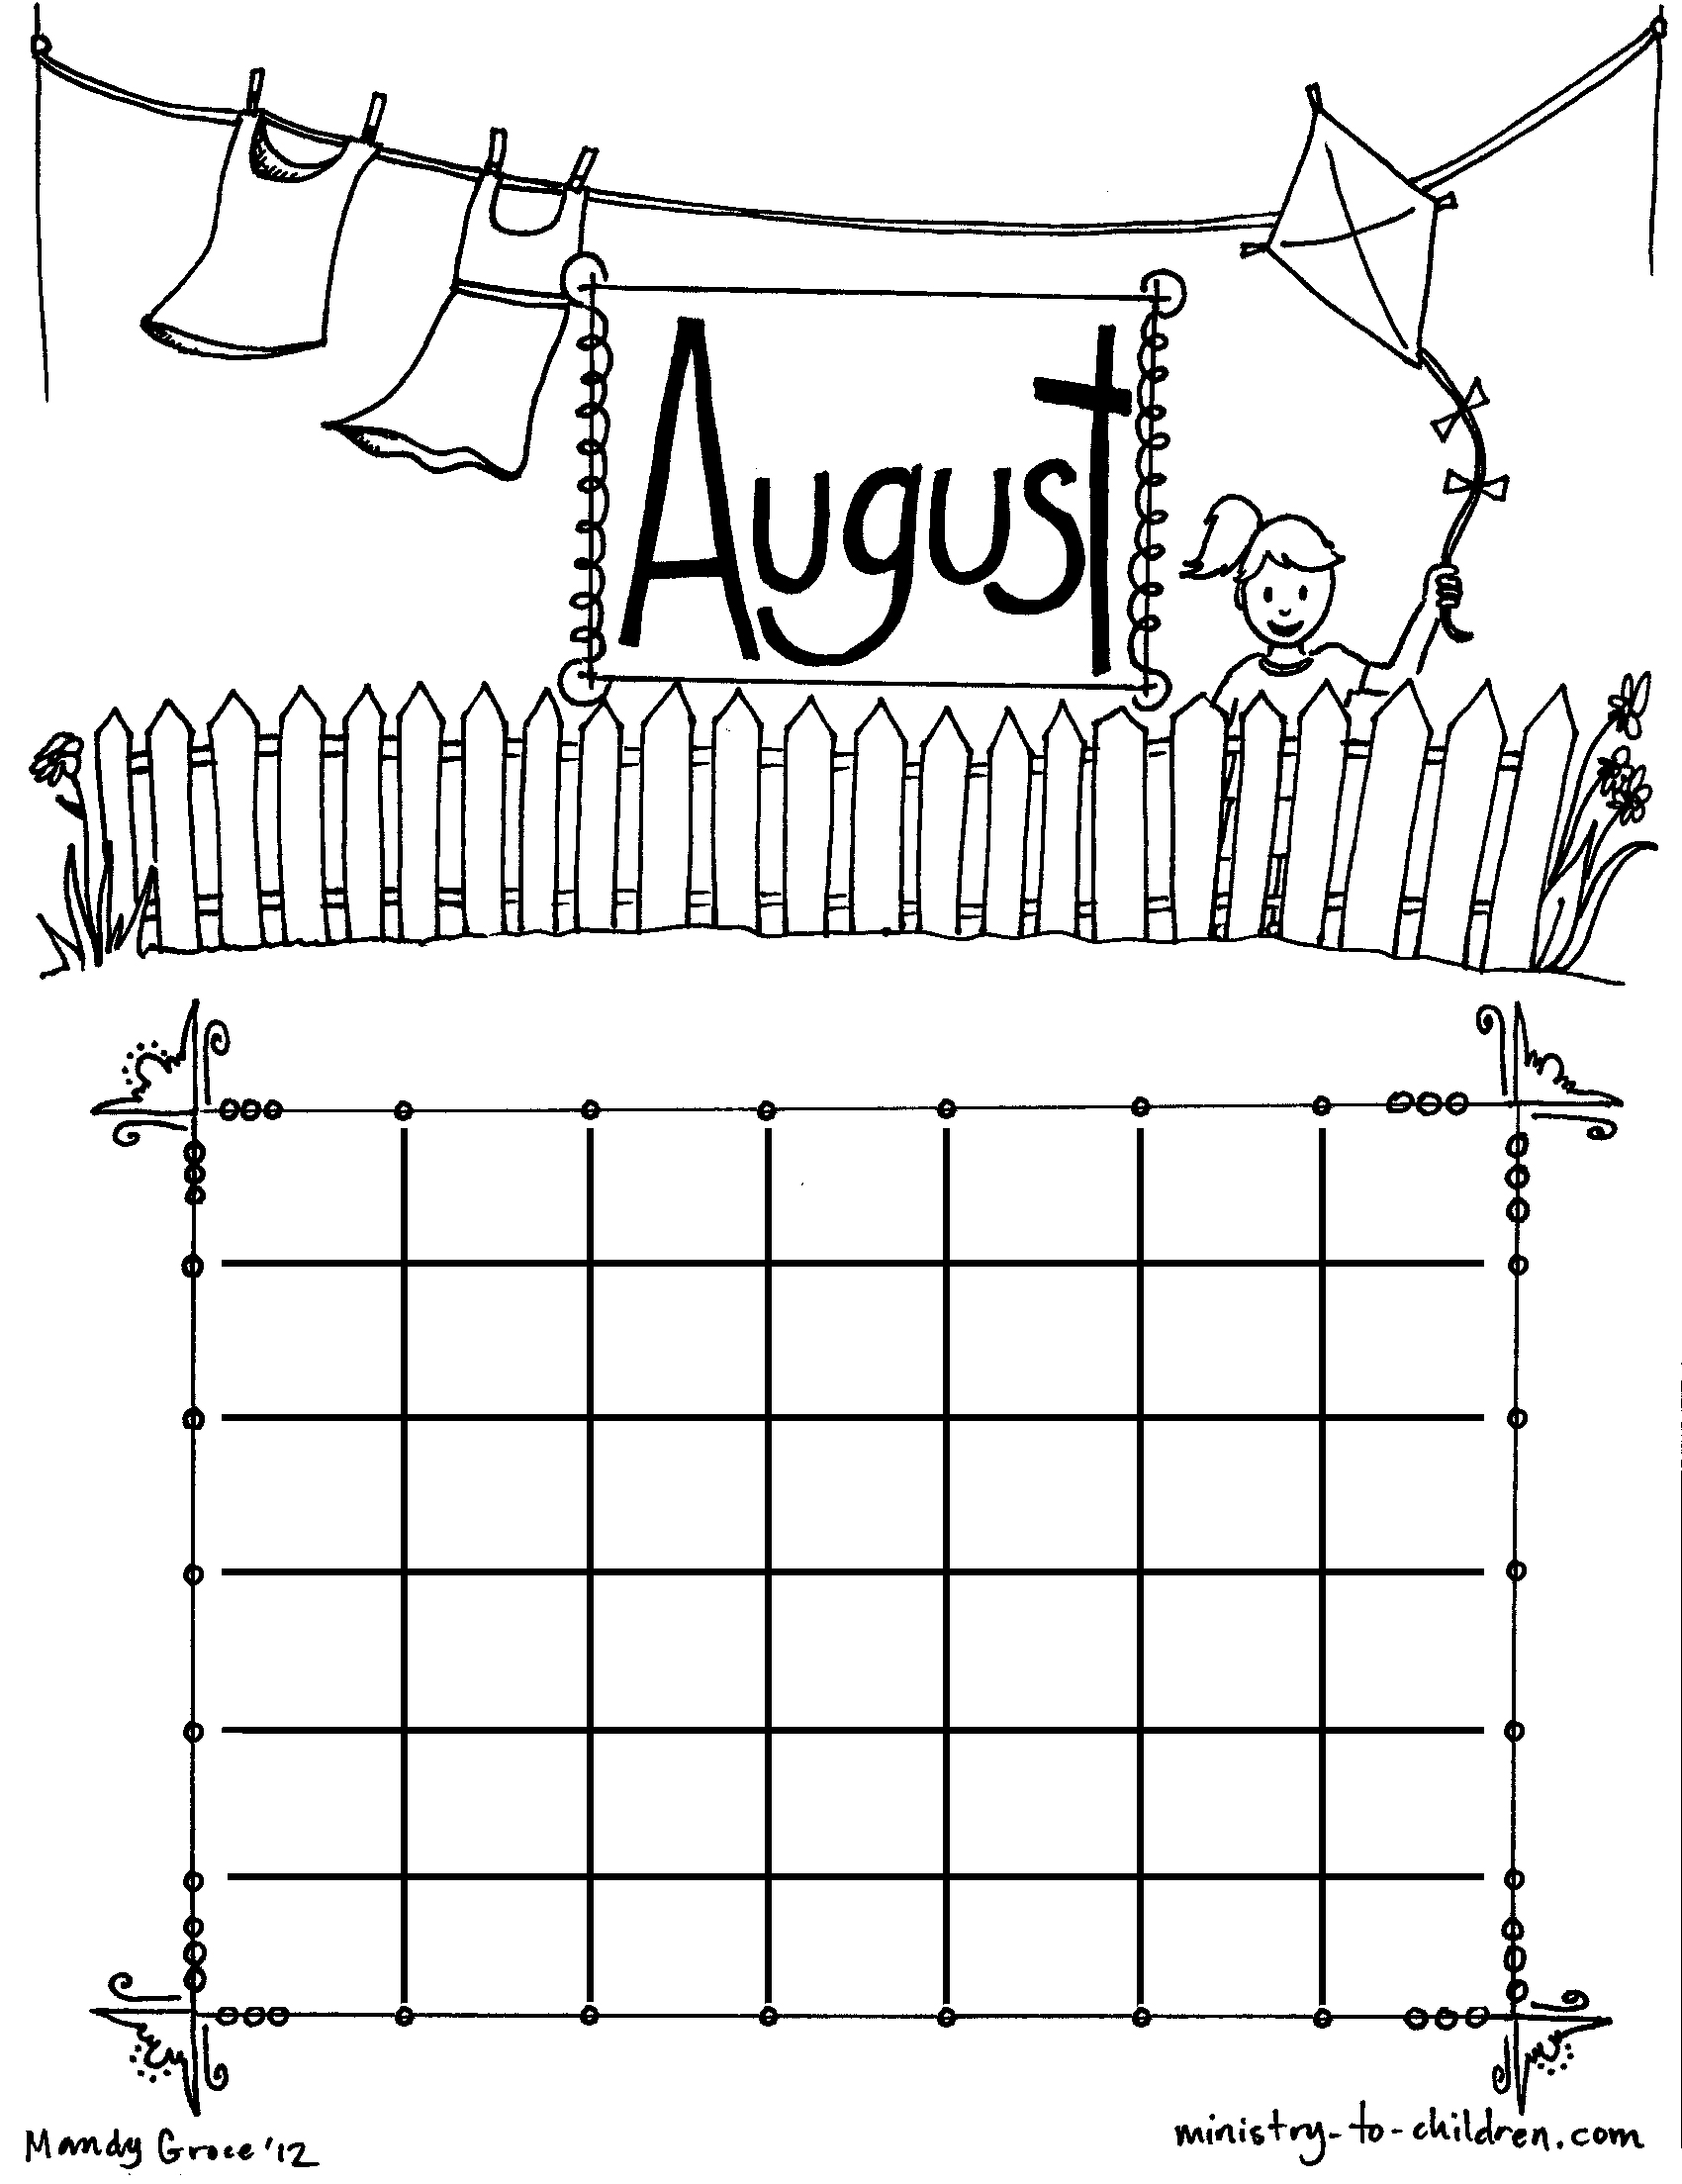 August coloring pages to download and print for free